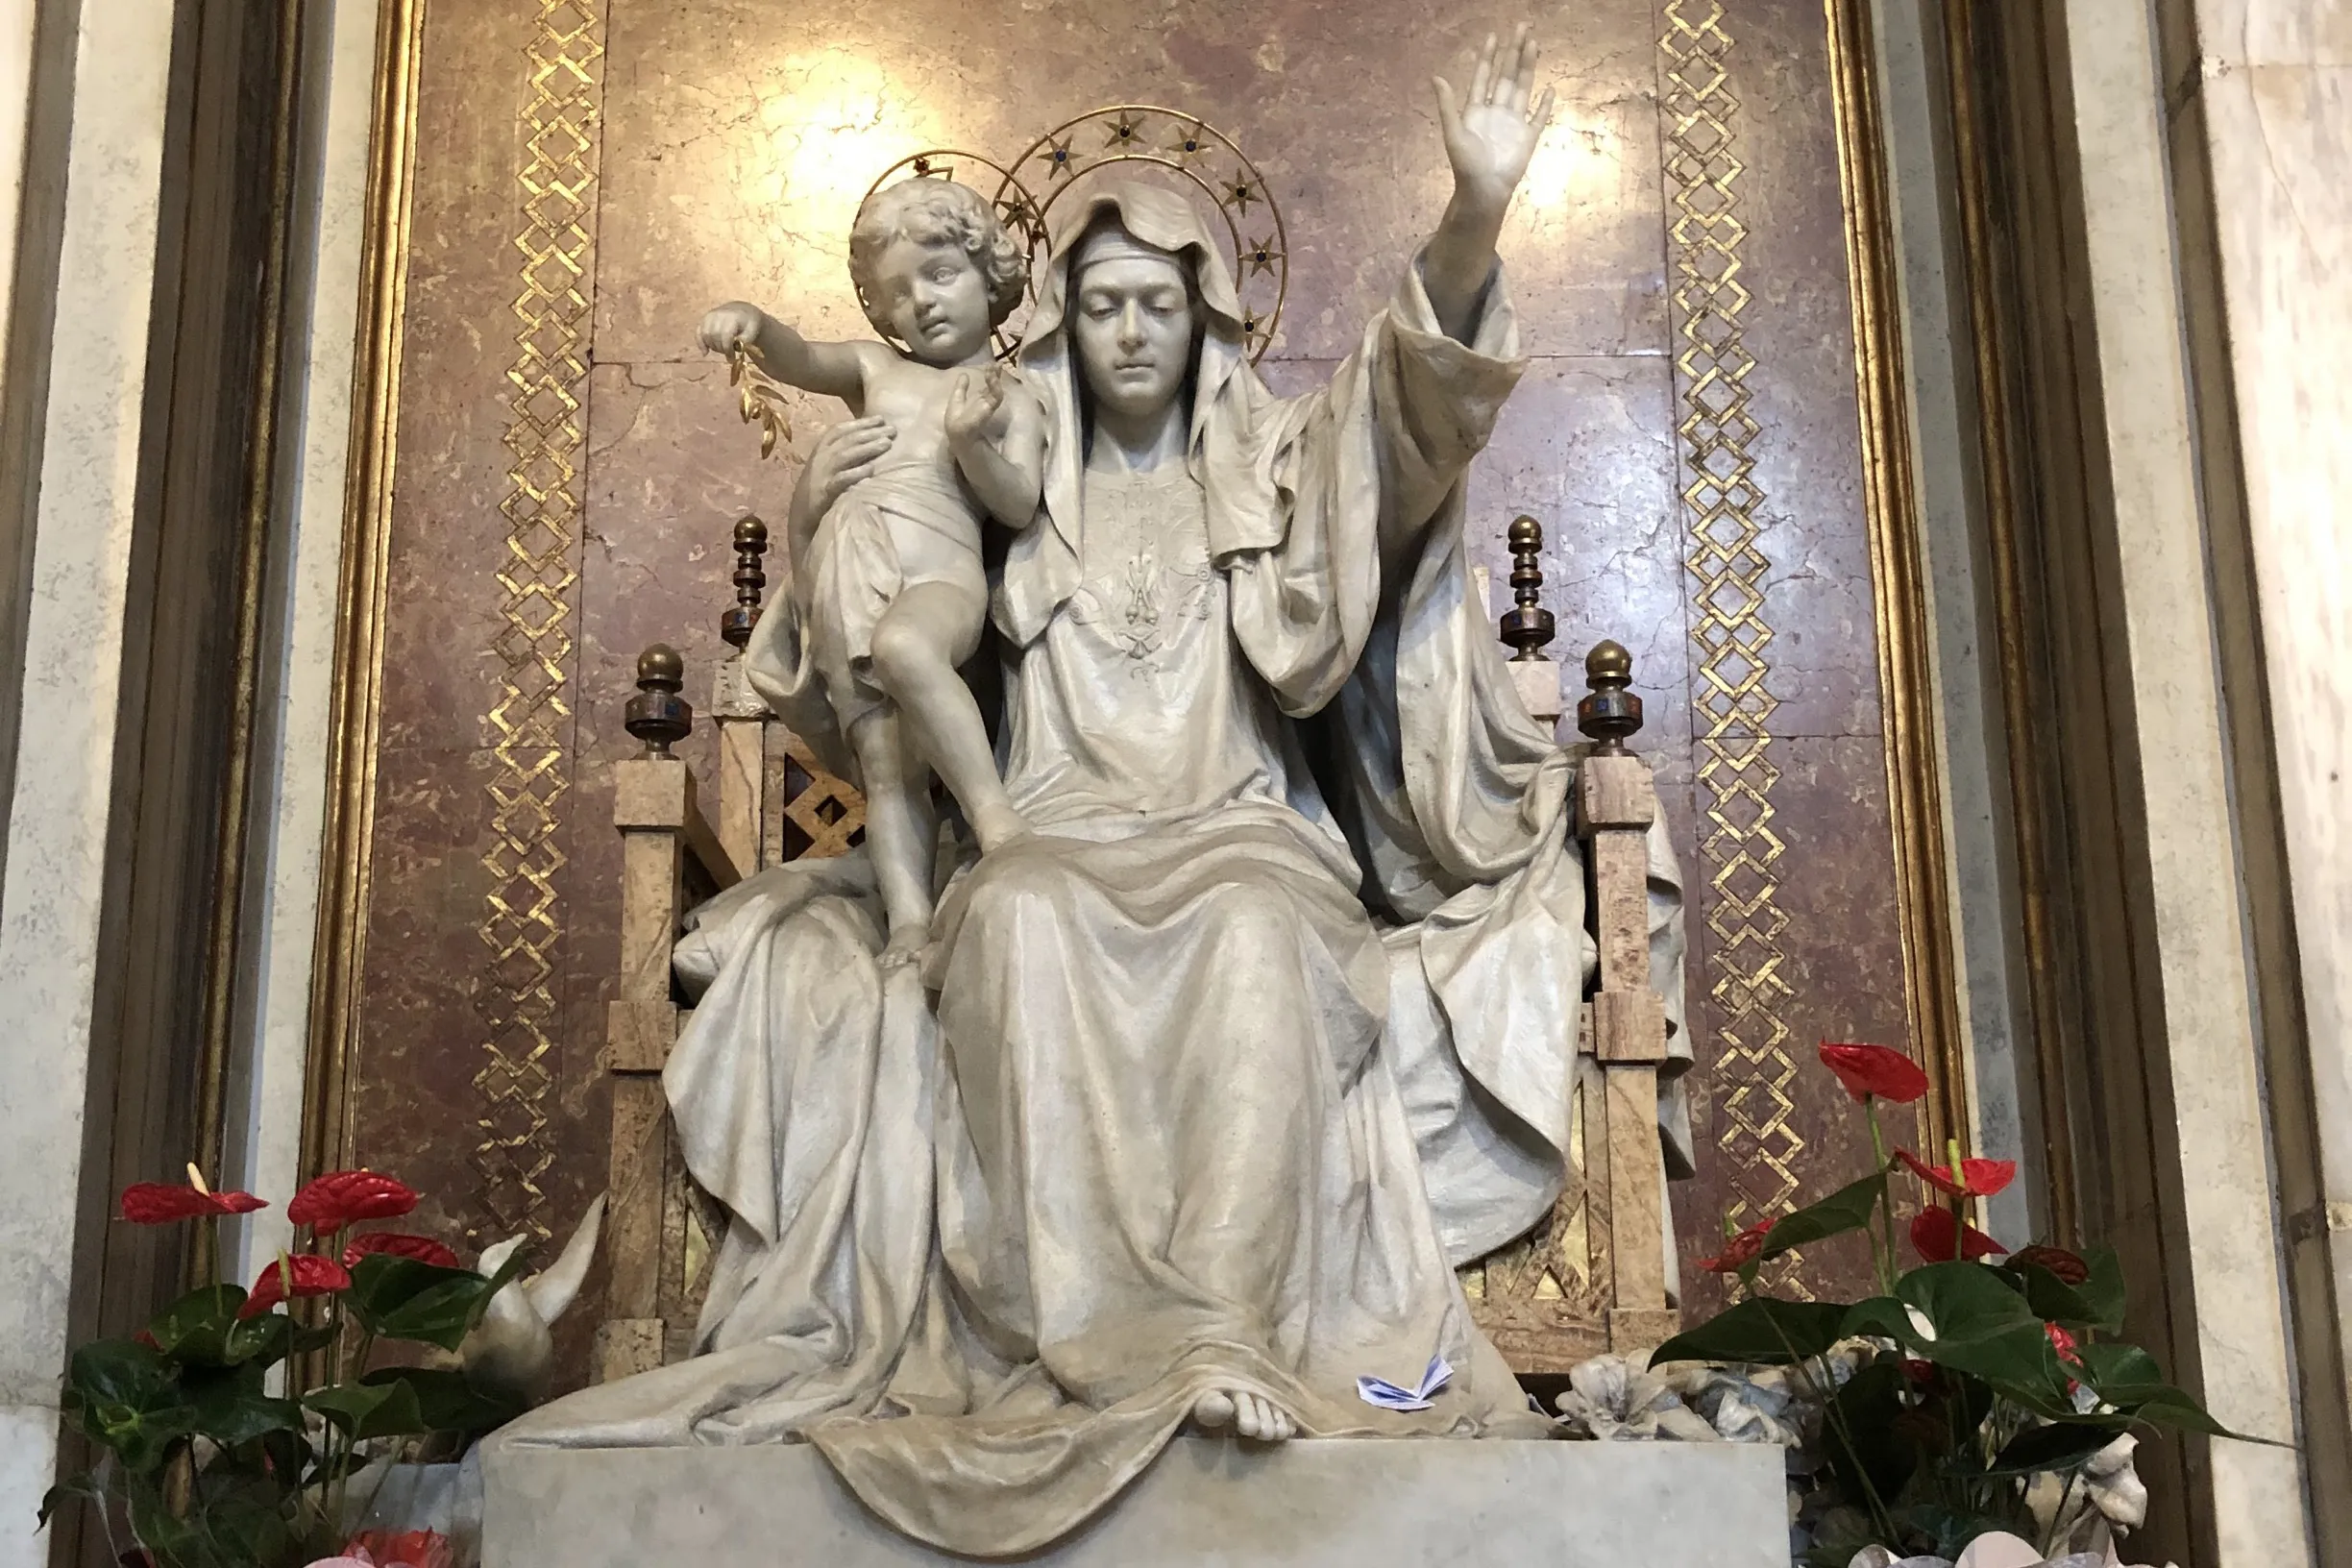 The statue of Our Lady, Queen of Peace in the Basilica of St. Mary Major.?w=200&h=150